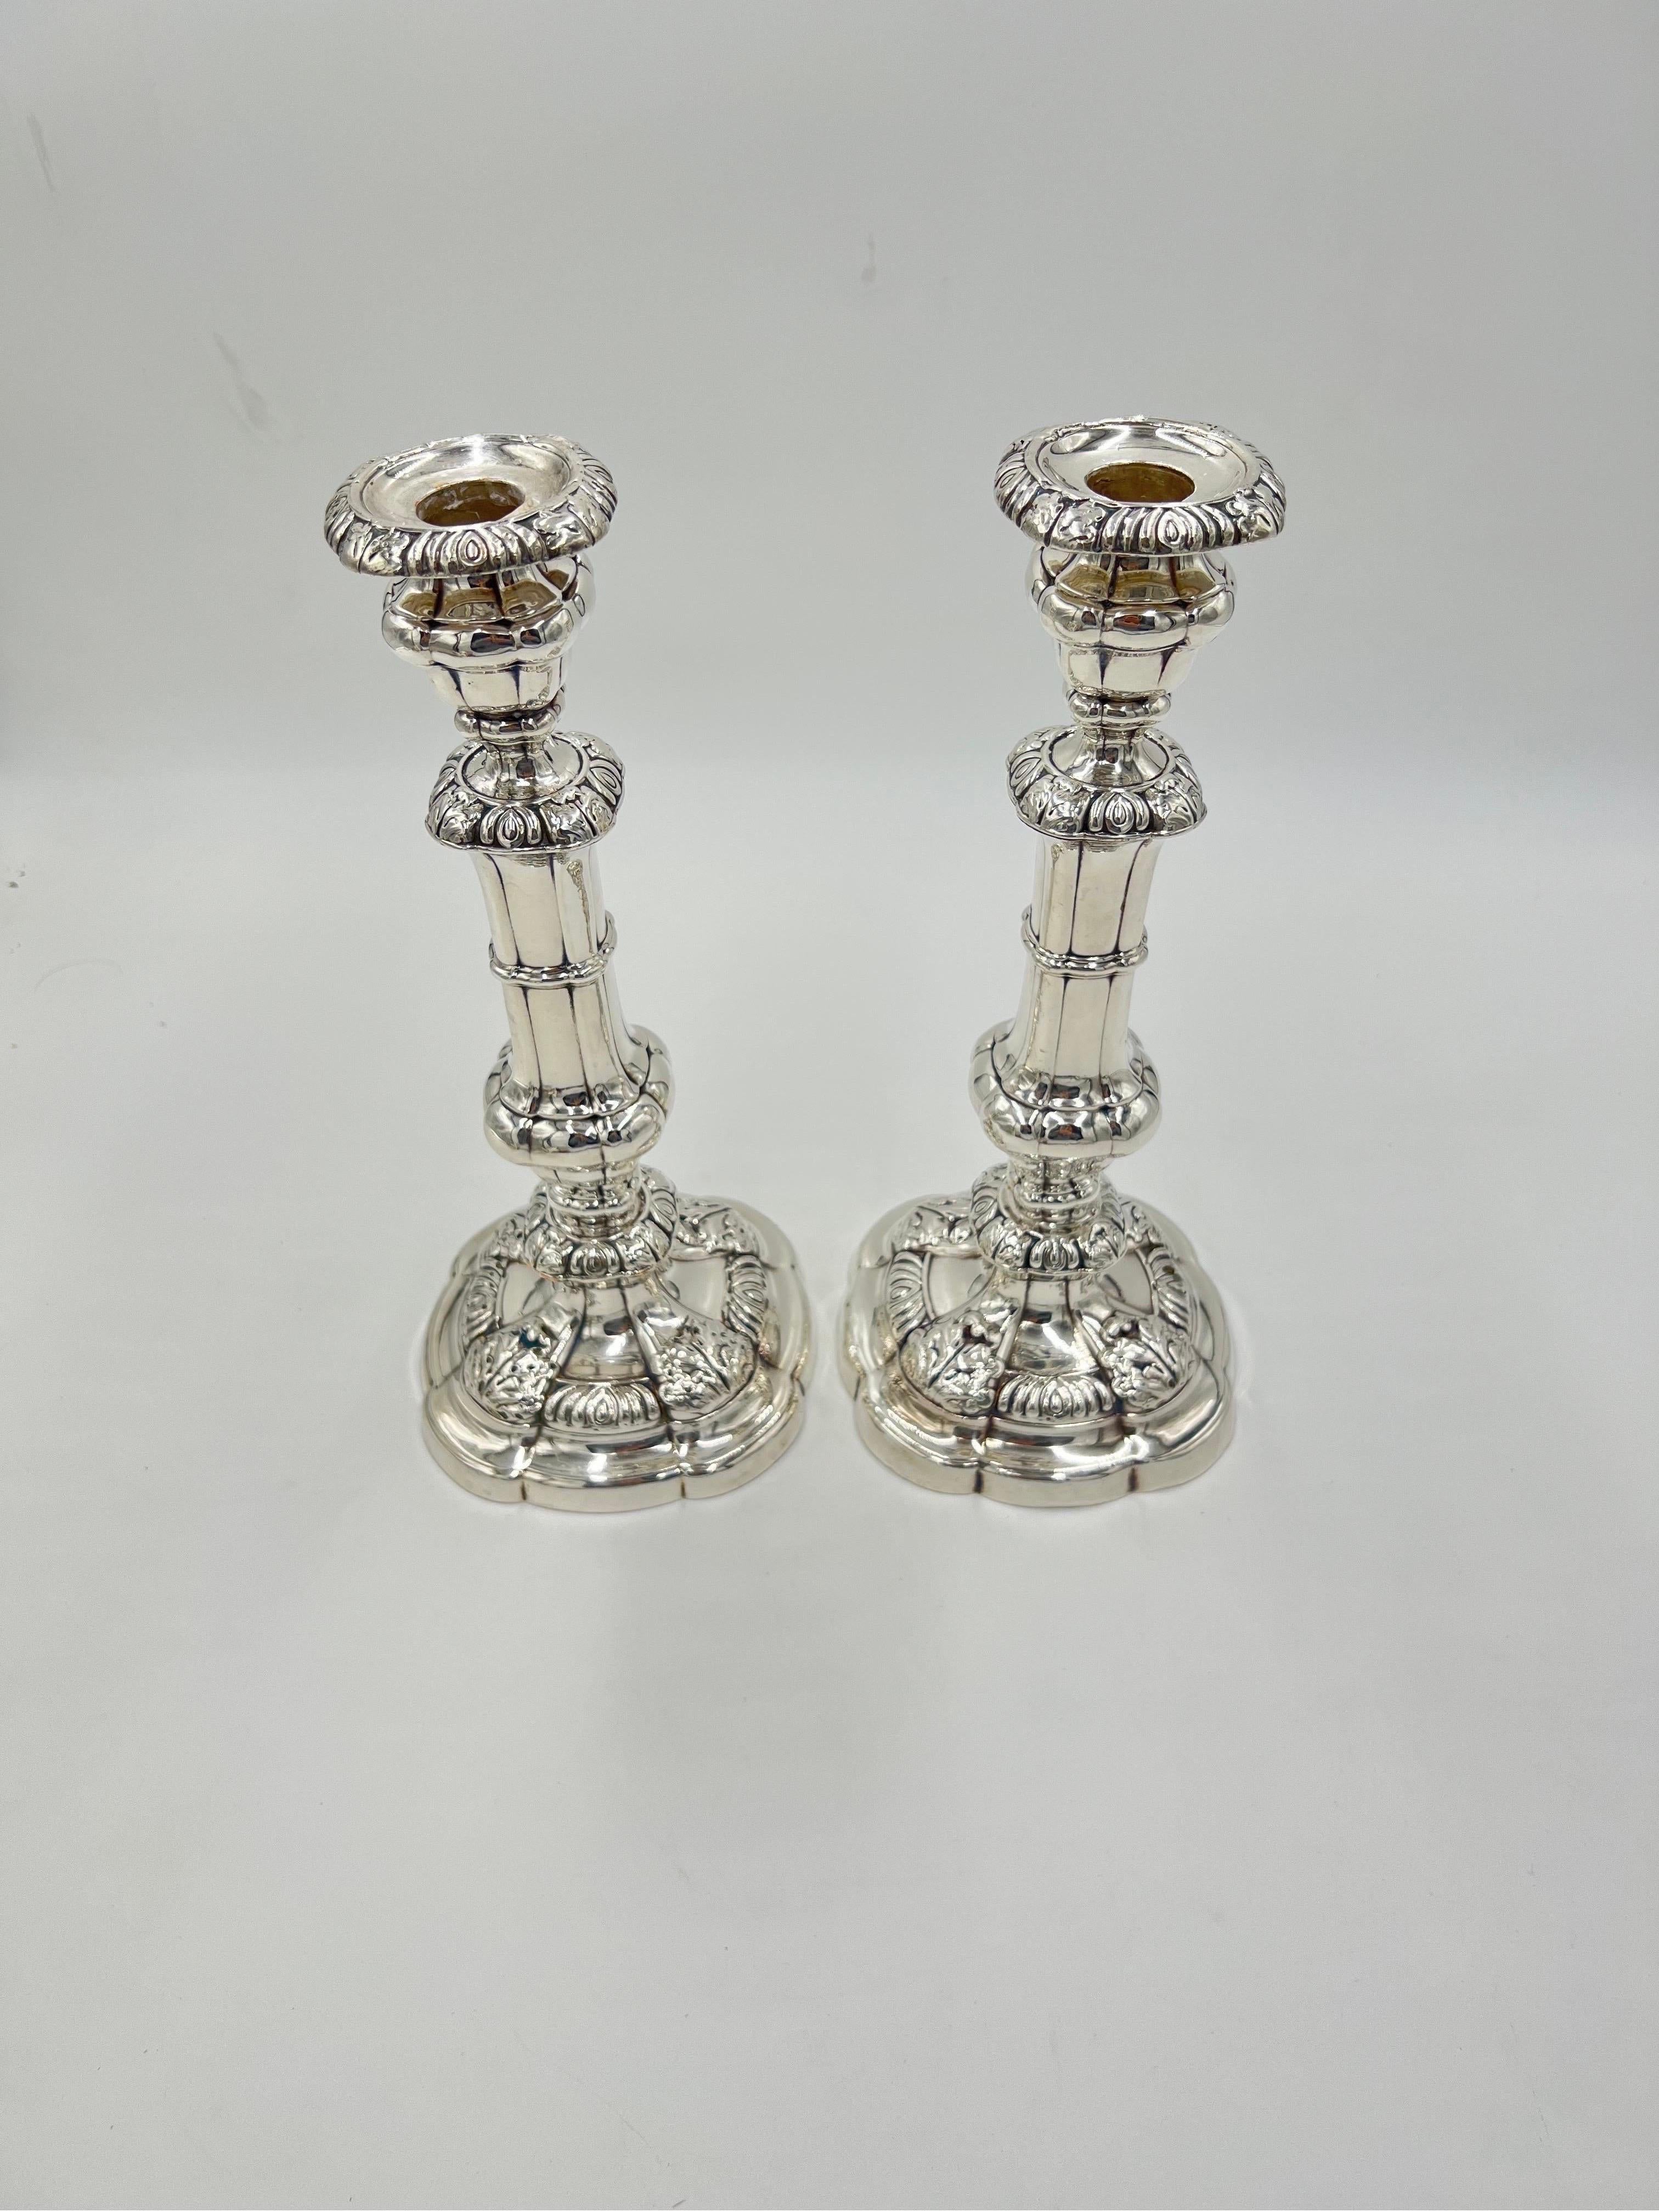 Pair, English George II Sterling Silver Candlesticks w/ Acanthus Leaf Decoration In Good Condition For Sale In Atlanta, GA